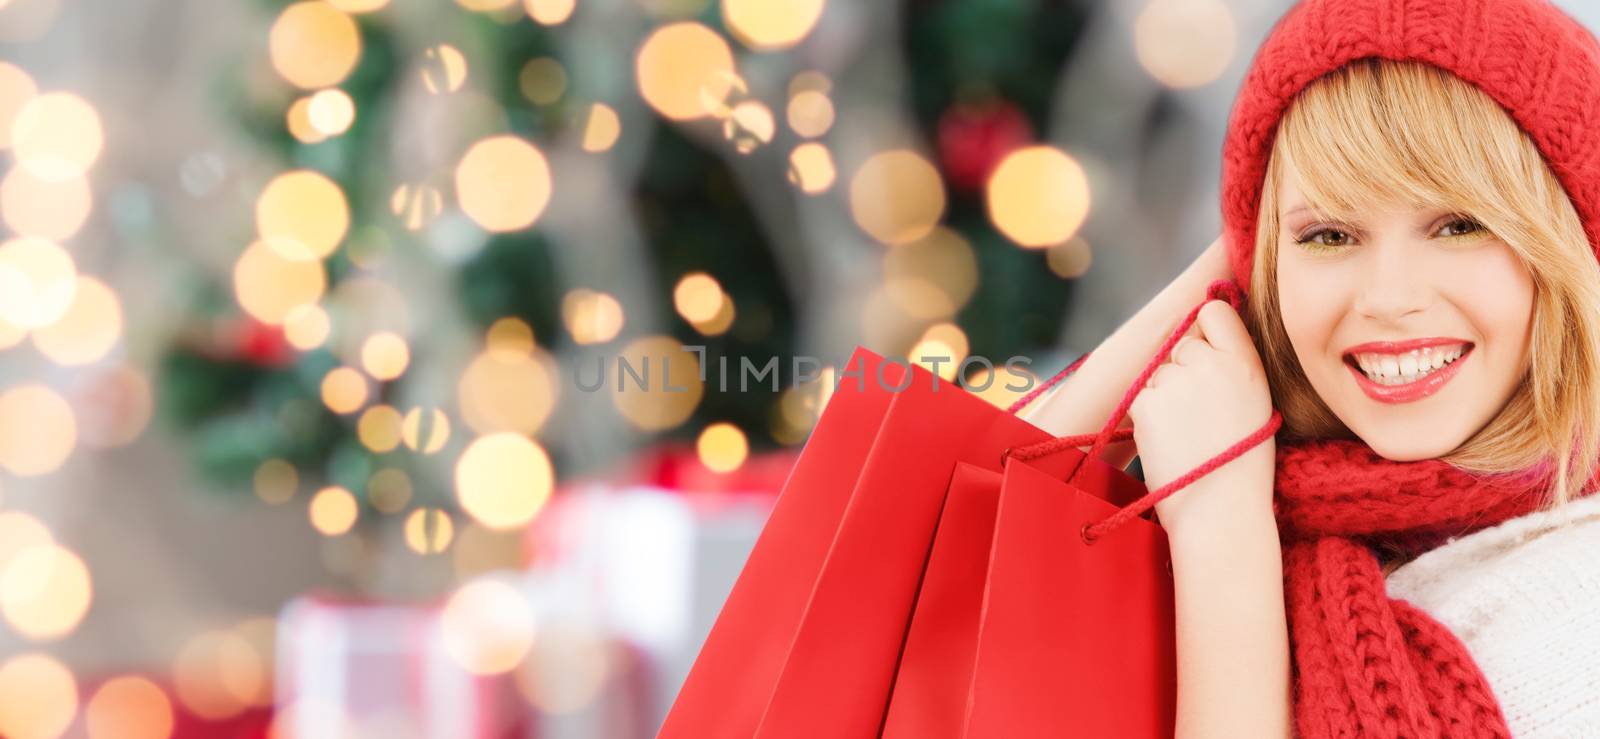 happiness, winter holidays and people concept - smiling young woman in hat and scarf with red shopping bags over christmas tree background